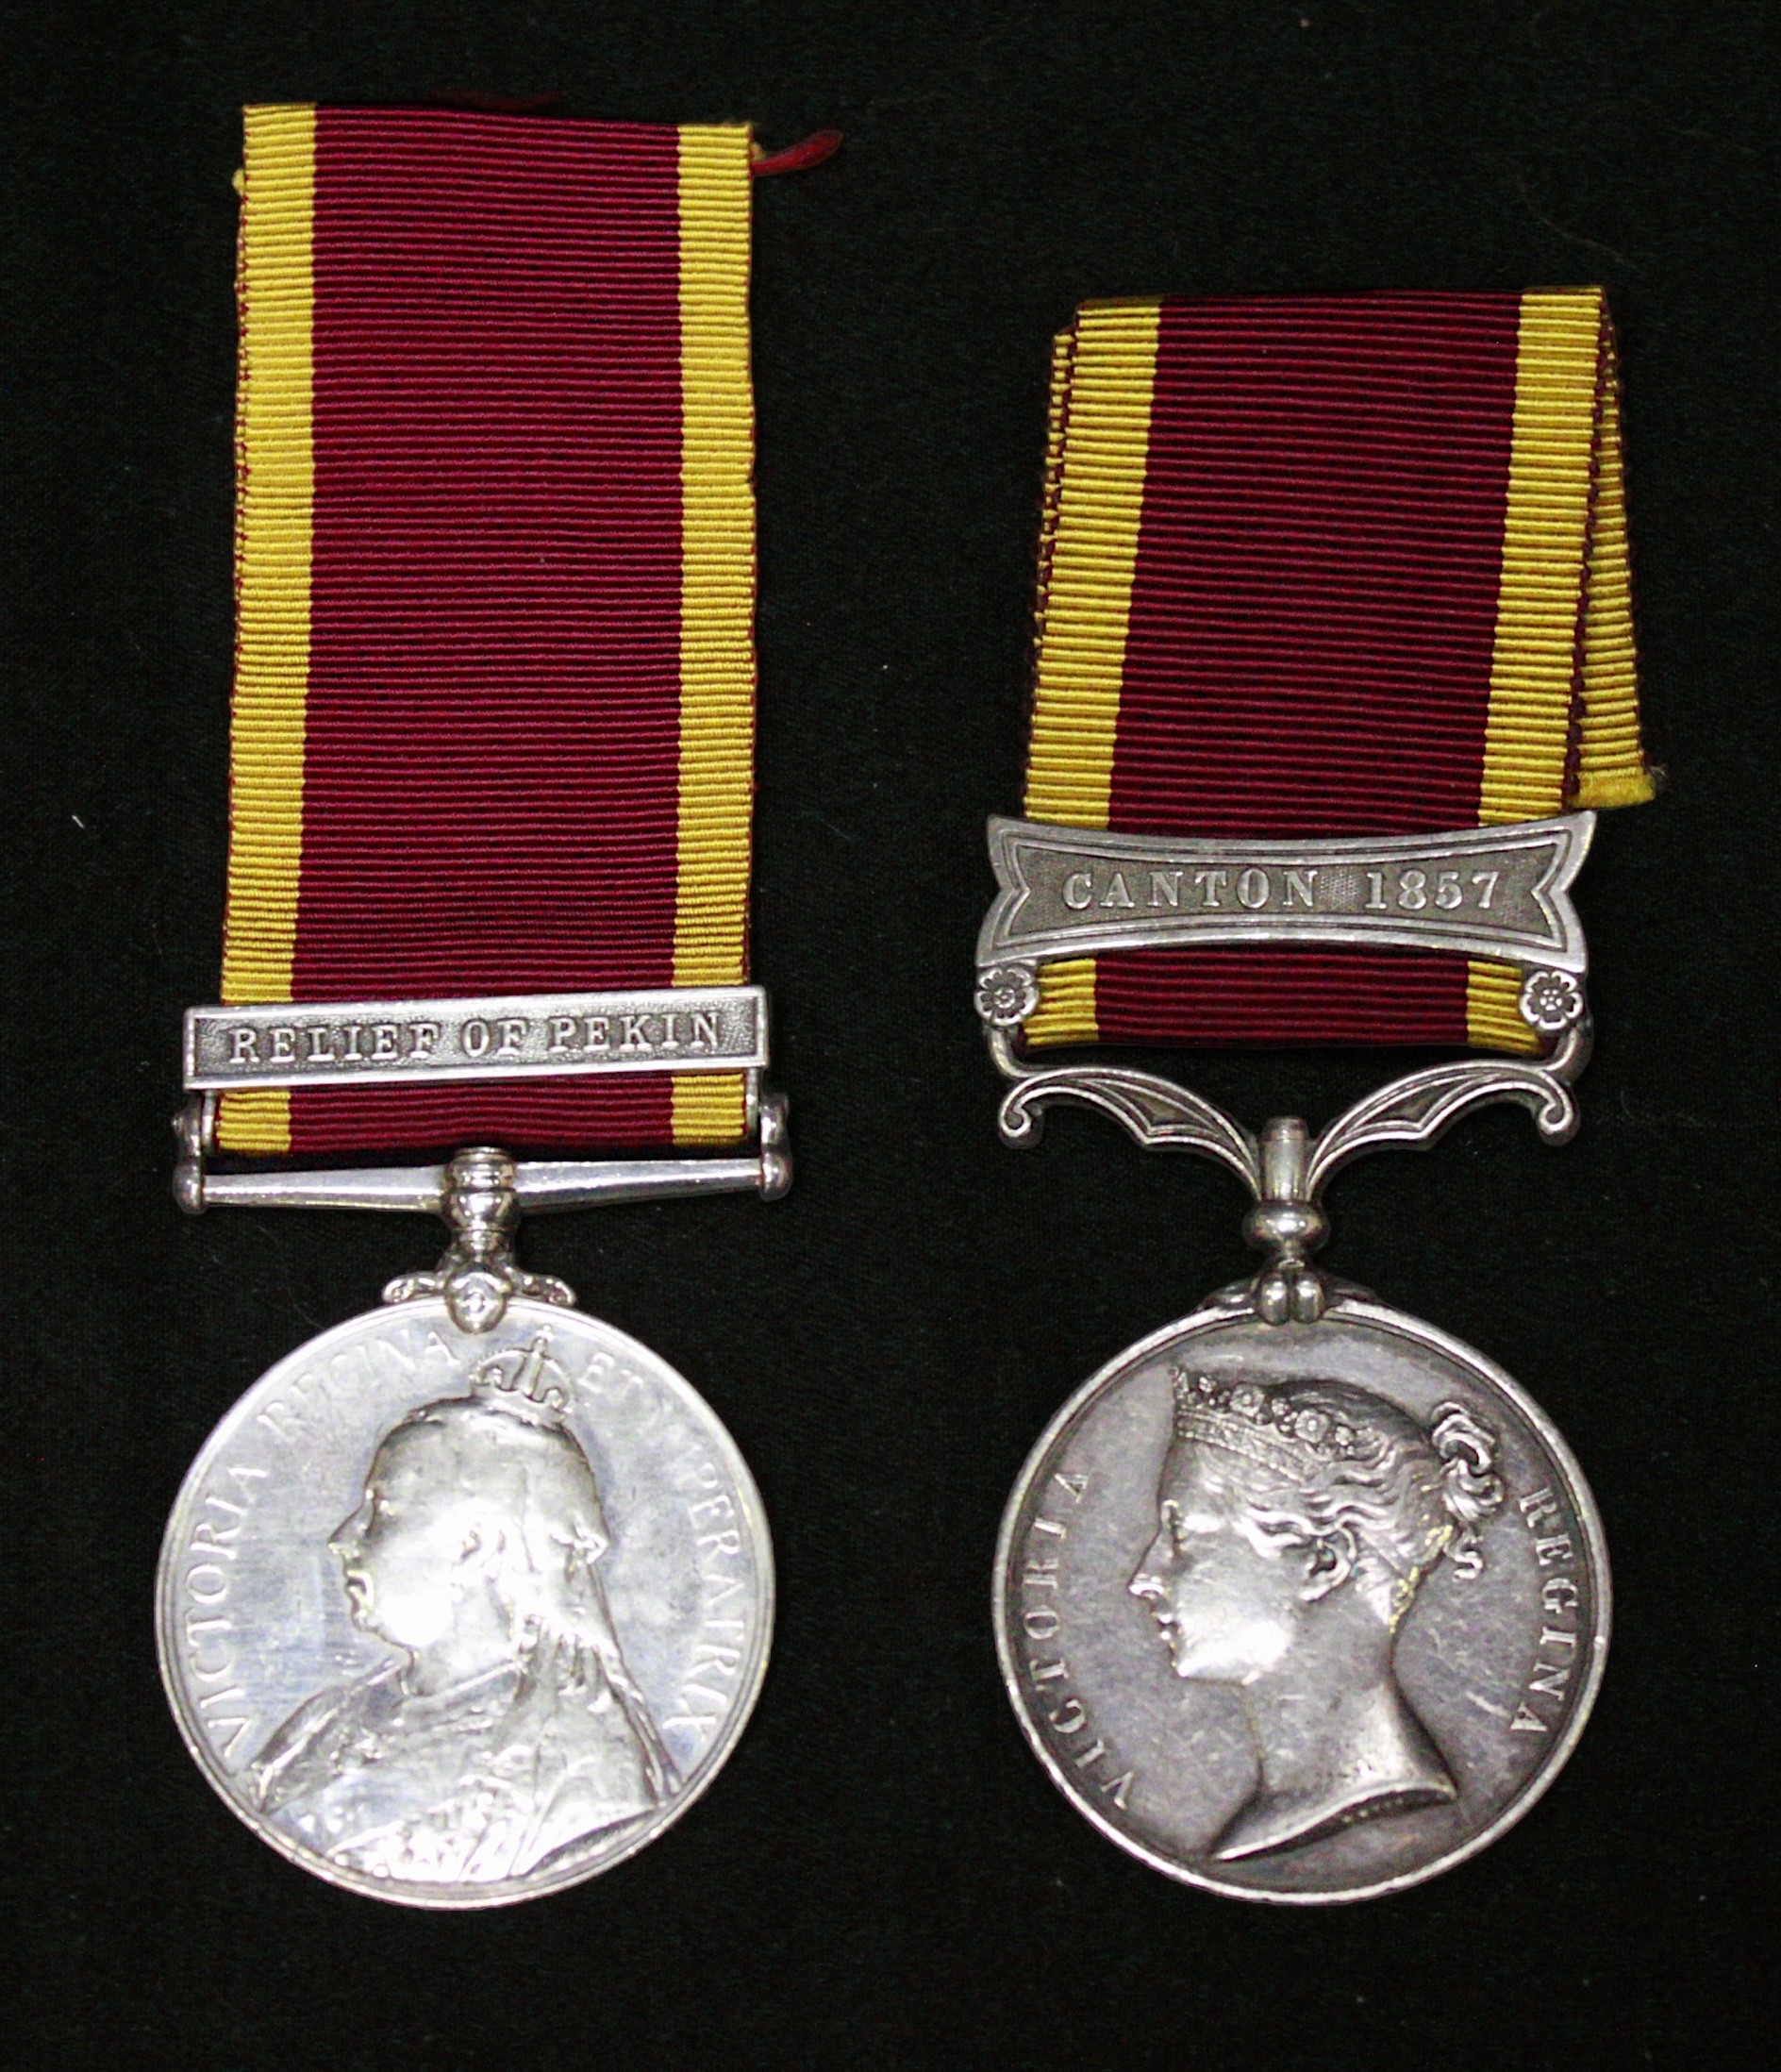 A Second China War Medal with Canton 1857 Clasp to John Barry 59th Regt. and a China War Medal - Image 2 of 4